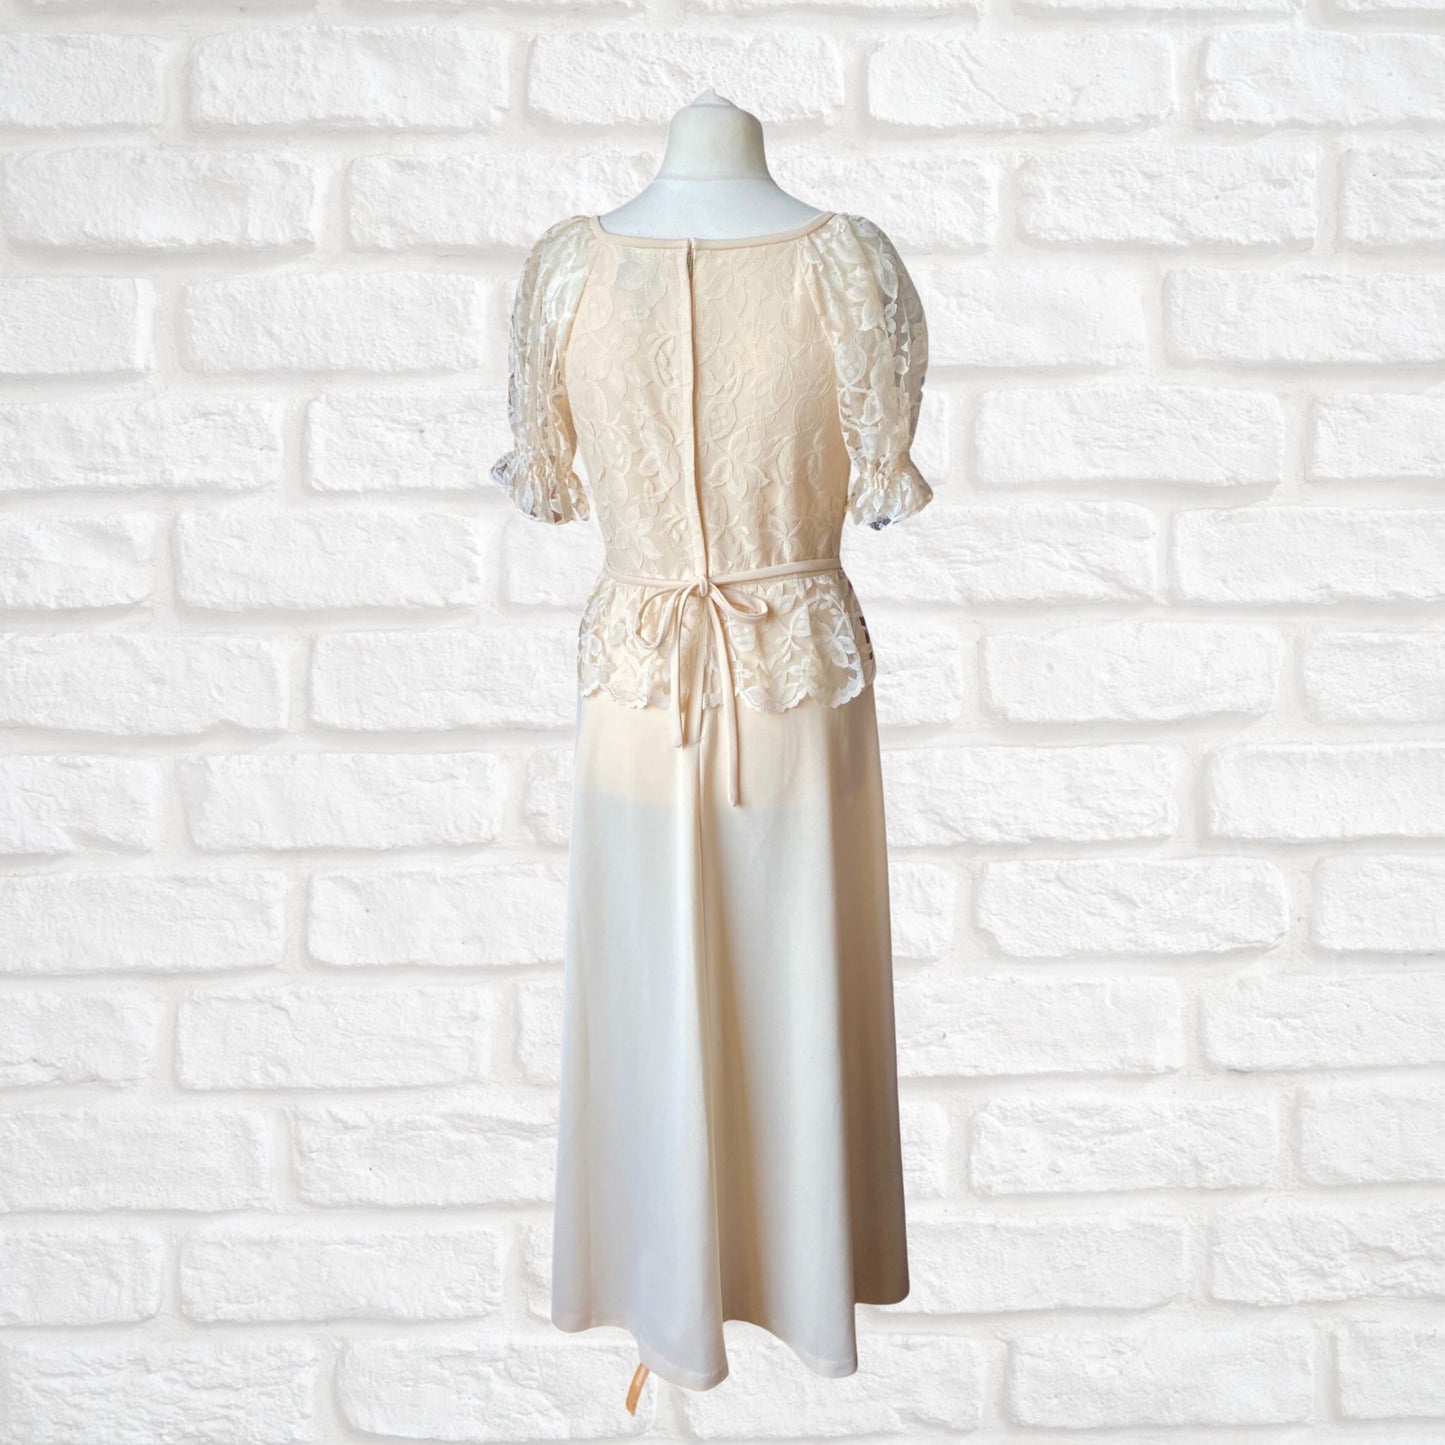 Vintage Cream 70s Maxi Dress with lace covered bodice and short lace puff sleeves. Approx UK size 10-12